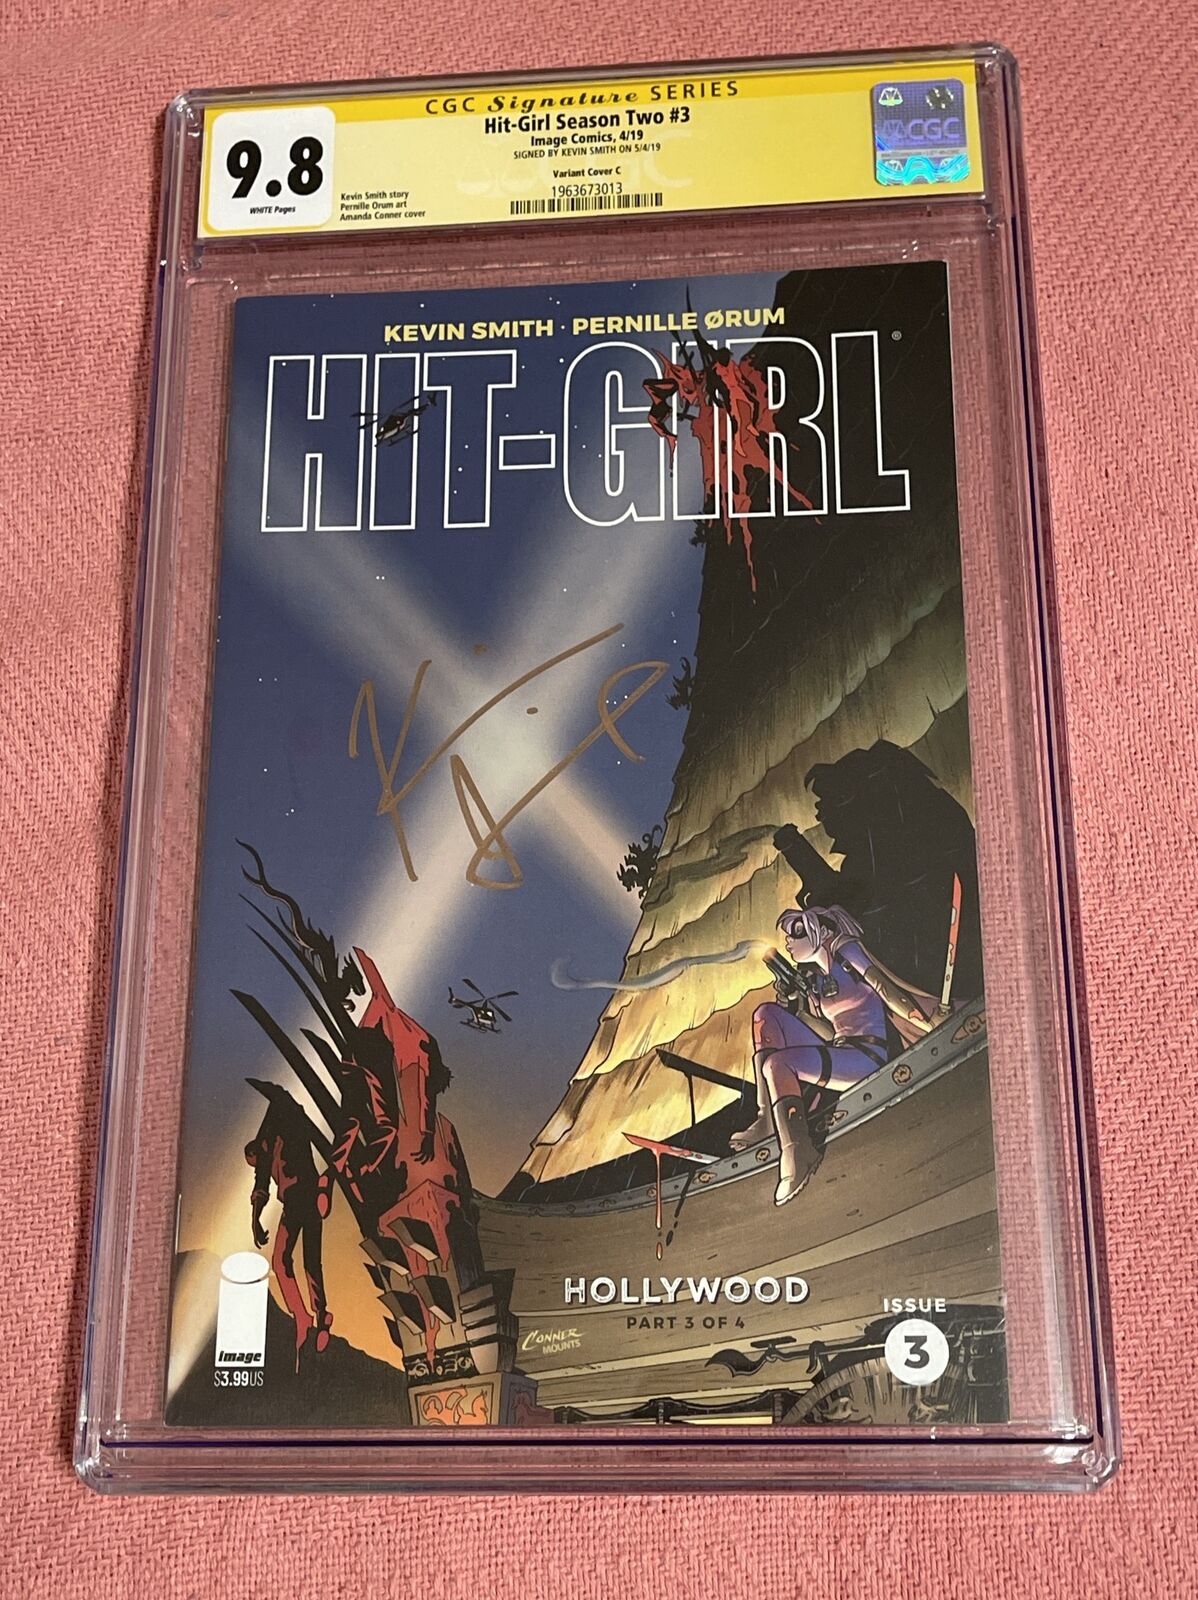 Hit-girl Season Two #3 CGC 9.8, Signed By Kevin Smith